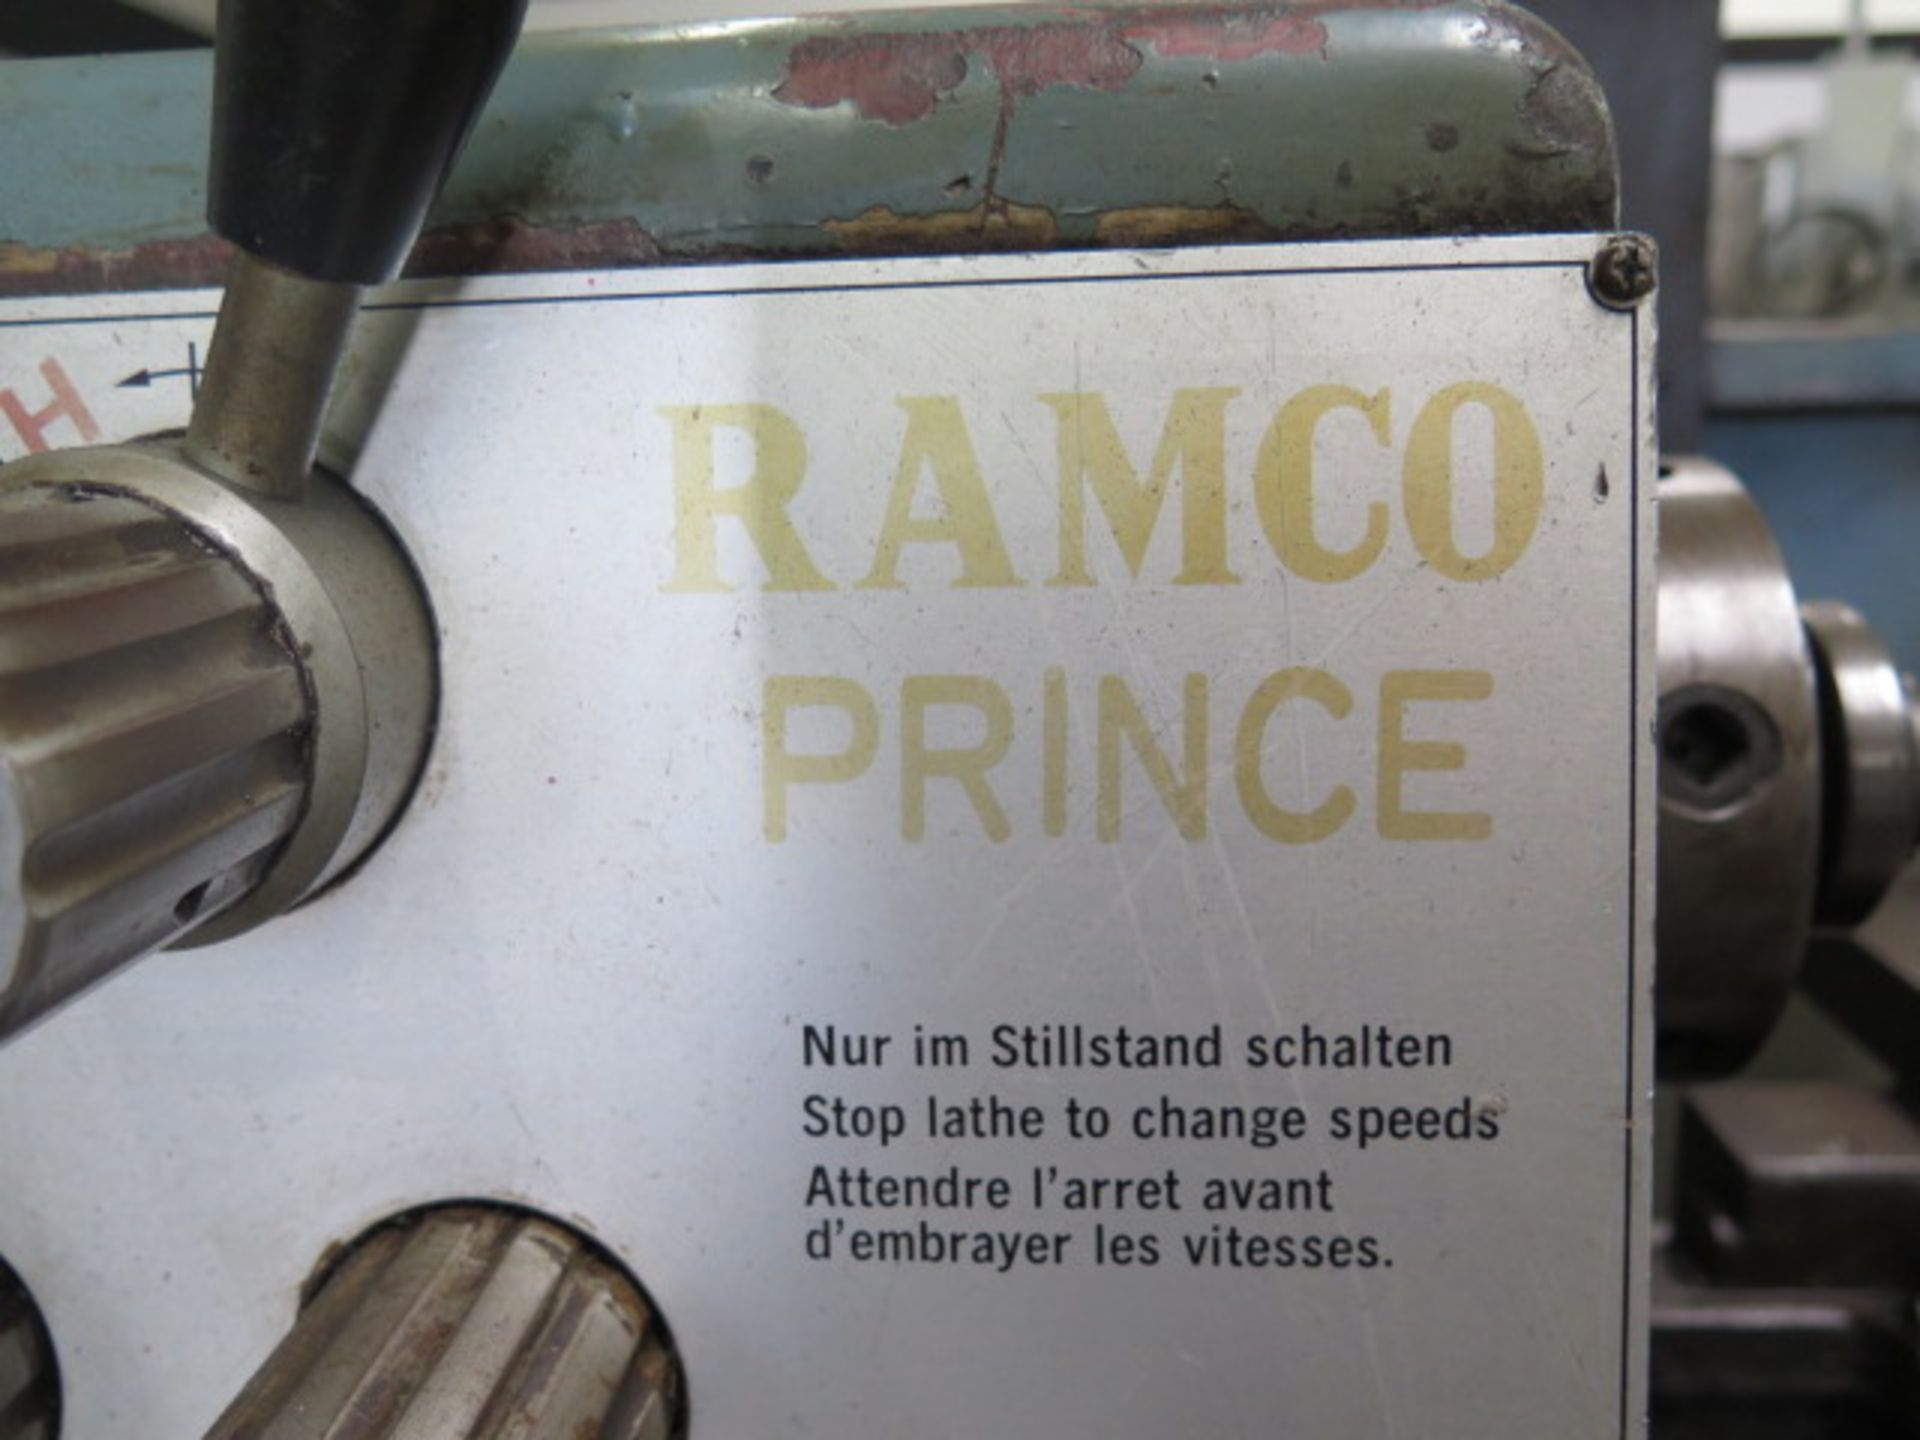 Ramco "Prince" 11" x 30" Geared Head Lathe s/n 4064 w/ 105-2000 RPM, Inch/mm Threading, Tailstock, - Image 4 of 17